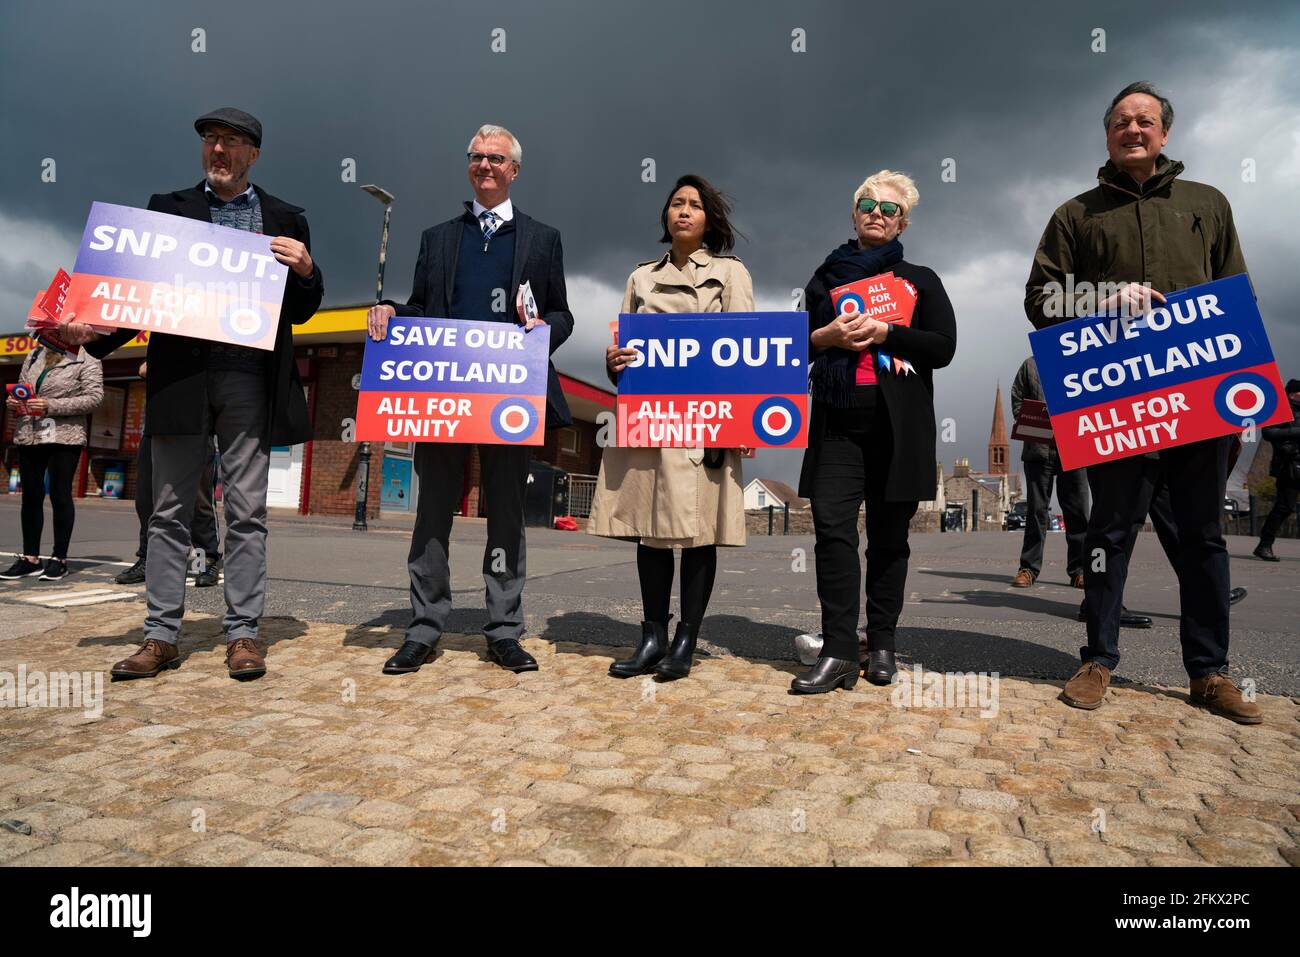 Troon, Scotland, UK. 4 May 2021. Founder of  pro Union All for Unity party George Galloway campaigns on the beach promenade in Troon in Ayrshire. Galloway made a live streamed speech and met with supporters and members of the public. He had lunch of fish and chips at The Wee Hurrie takeaway restaurant beside Troon harbour. Iain Masterton/Alamy Live News Stock Photo